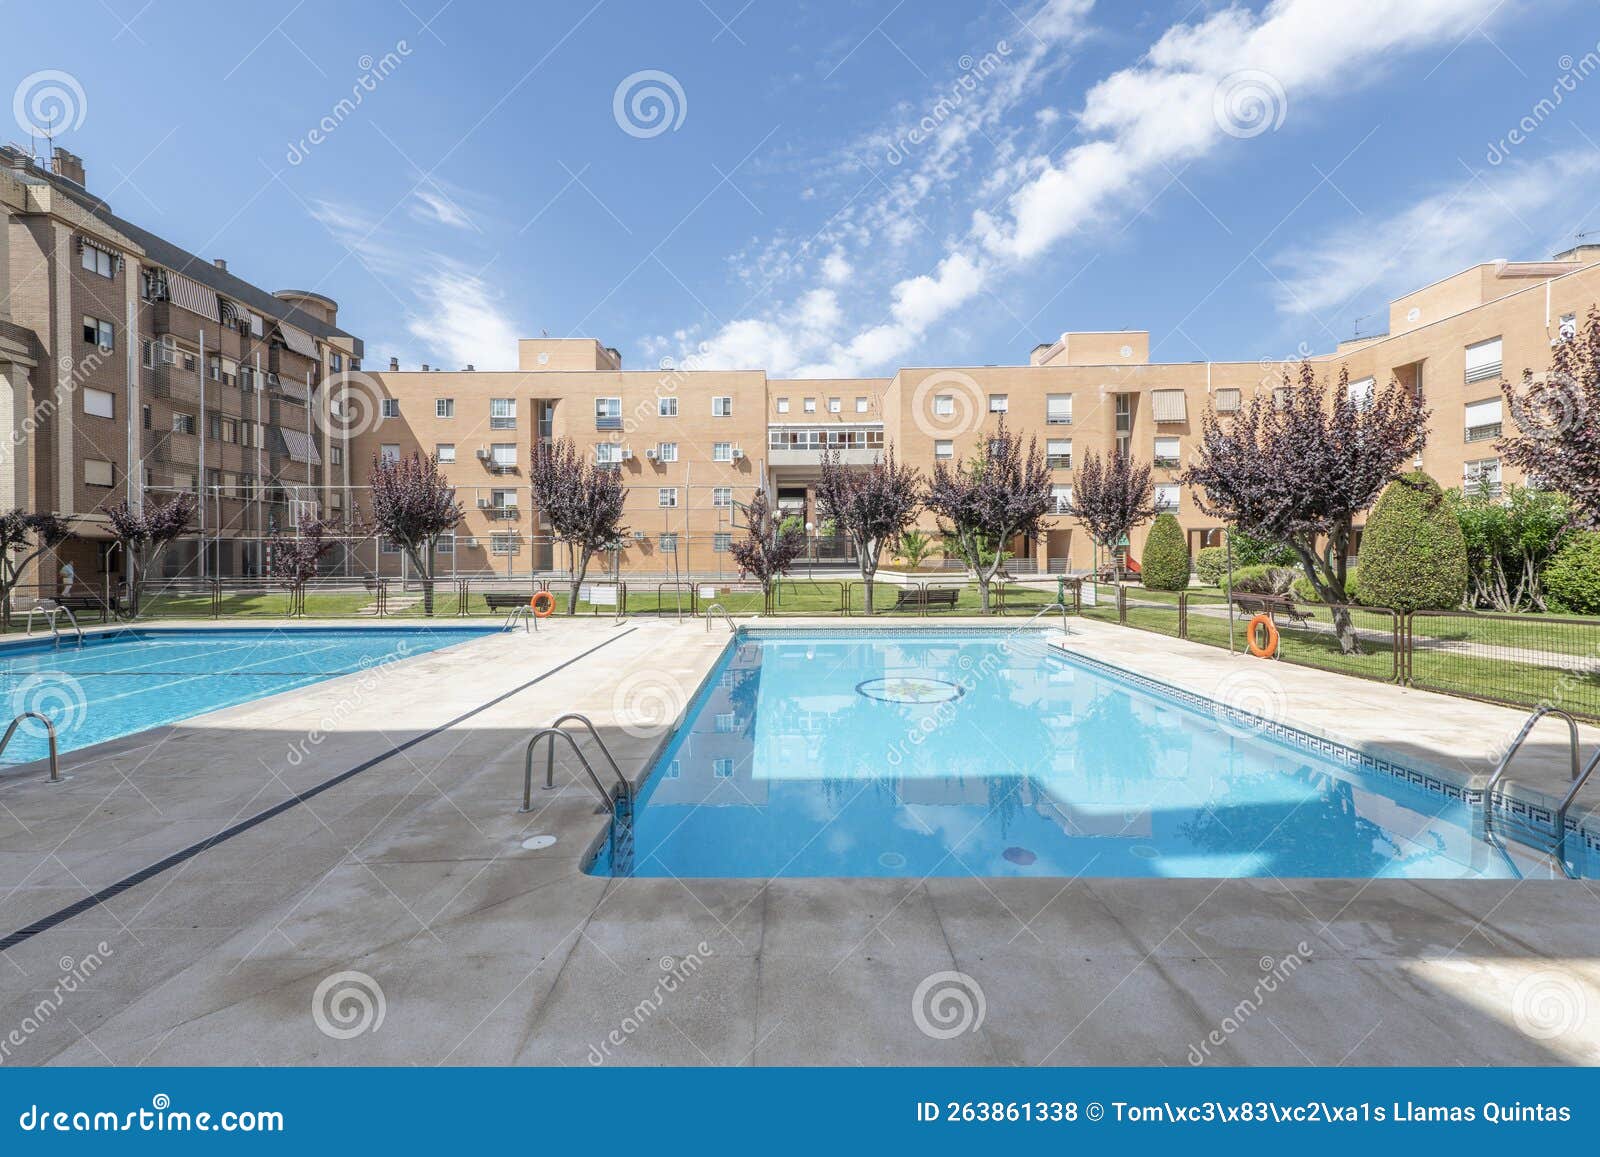 interior facades of a block patio of residential buildings with gardens and summer swimming pools with gardens and decorative